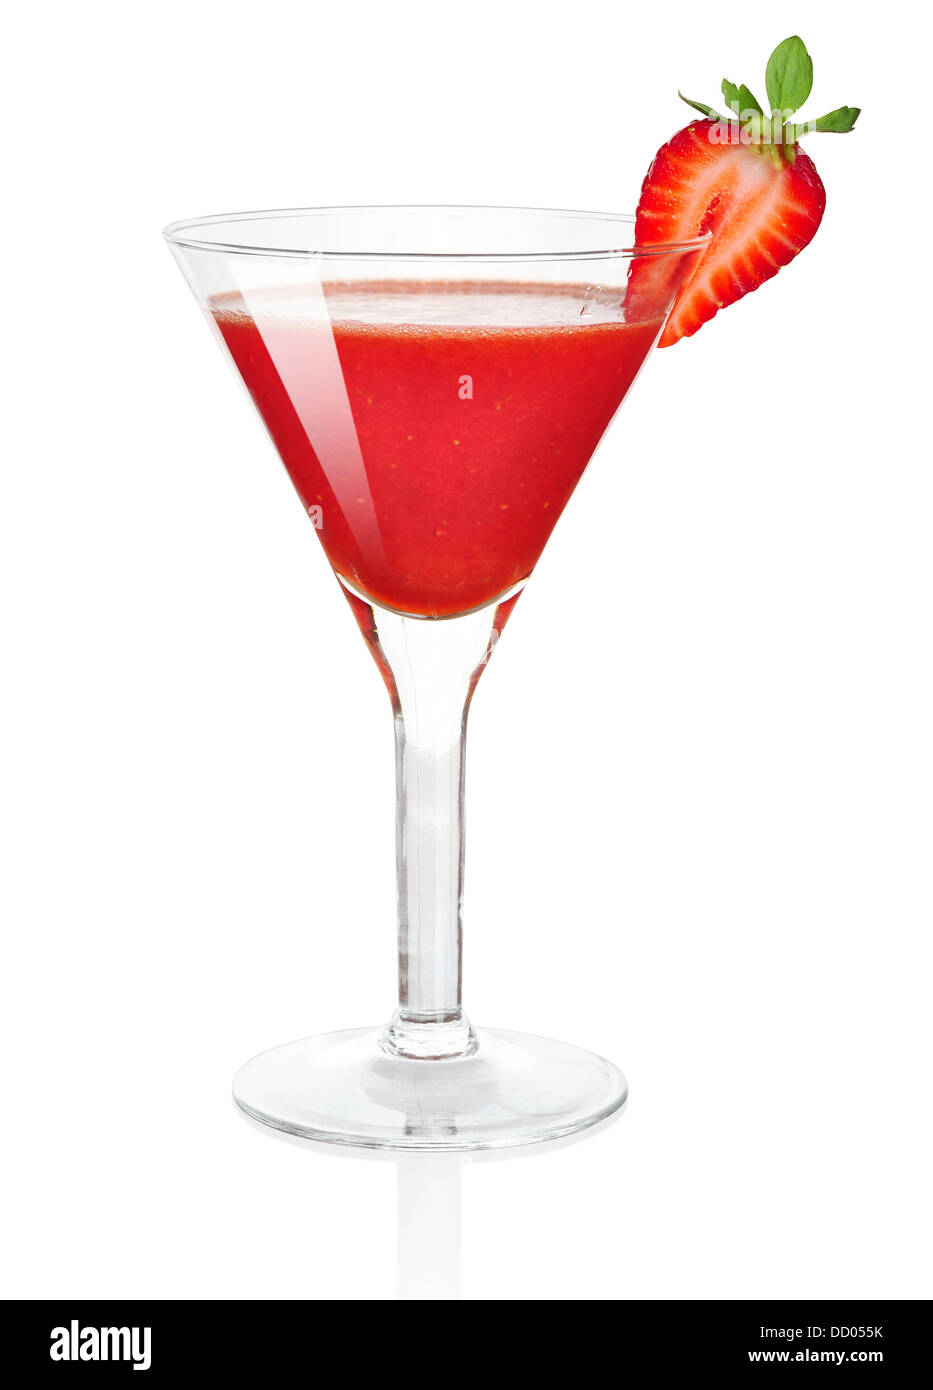 Frozen strawberry daiquiri alcohol cocktail isolated on white background Stock Photo